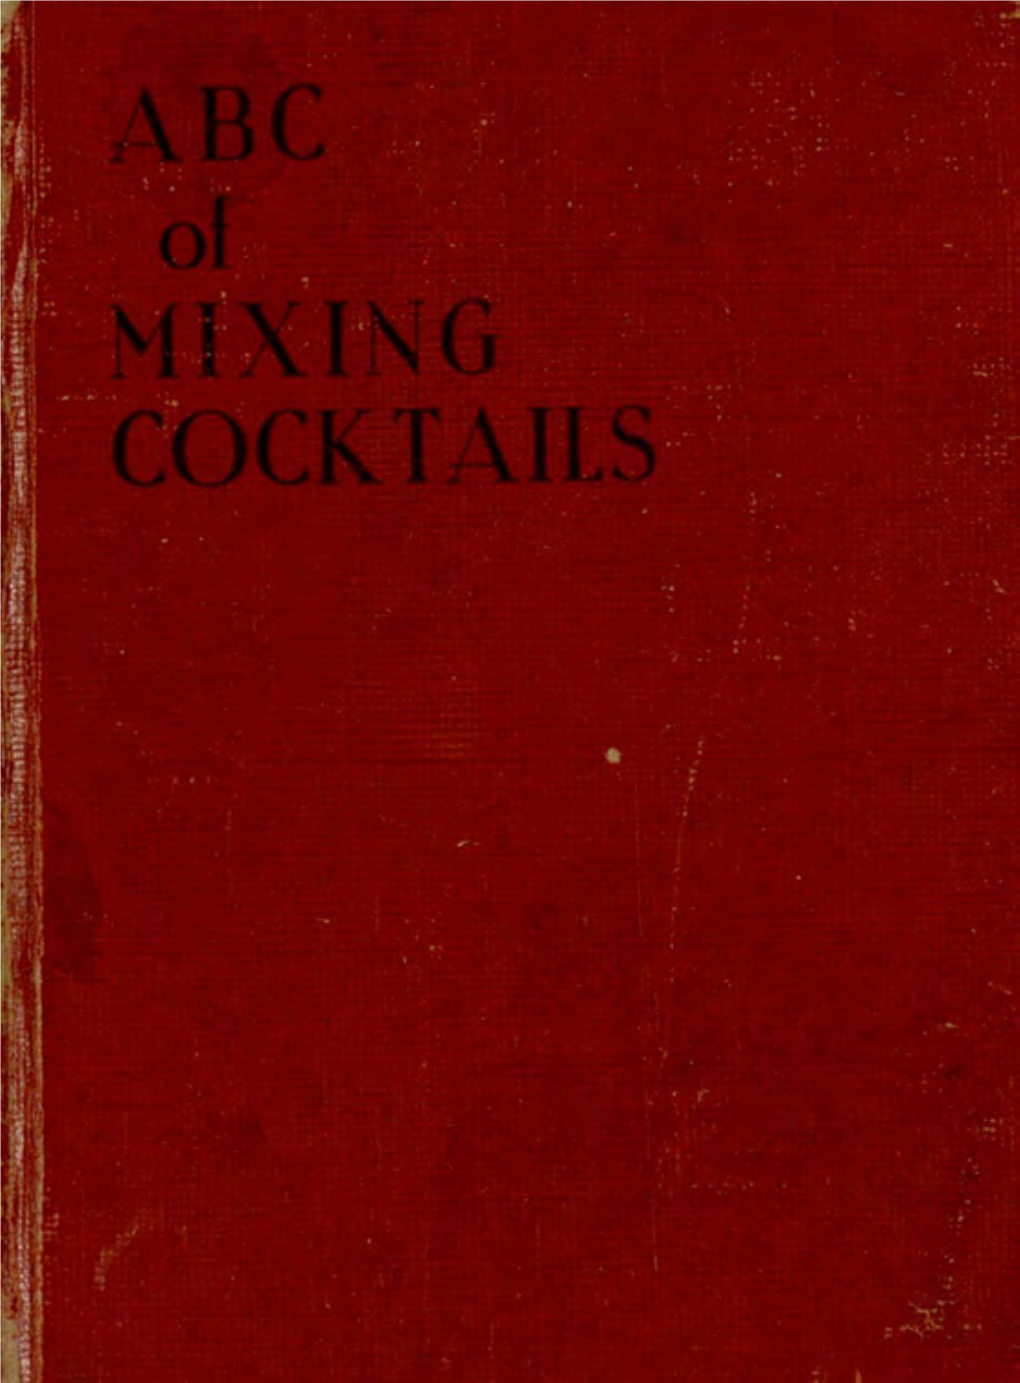 HARRY's ABC of Mixing Cocktails